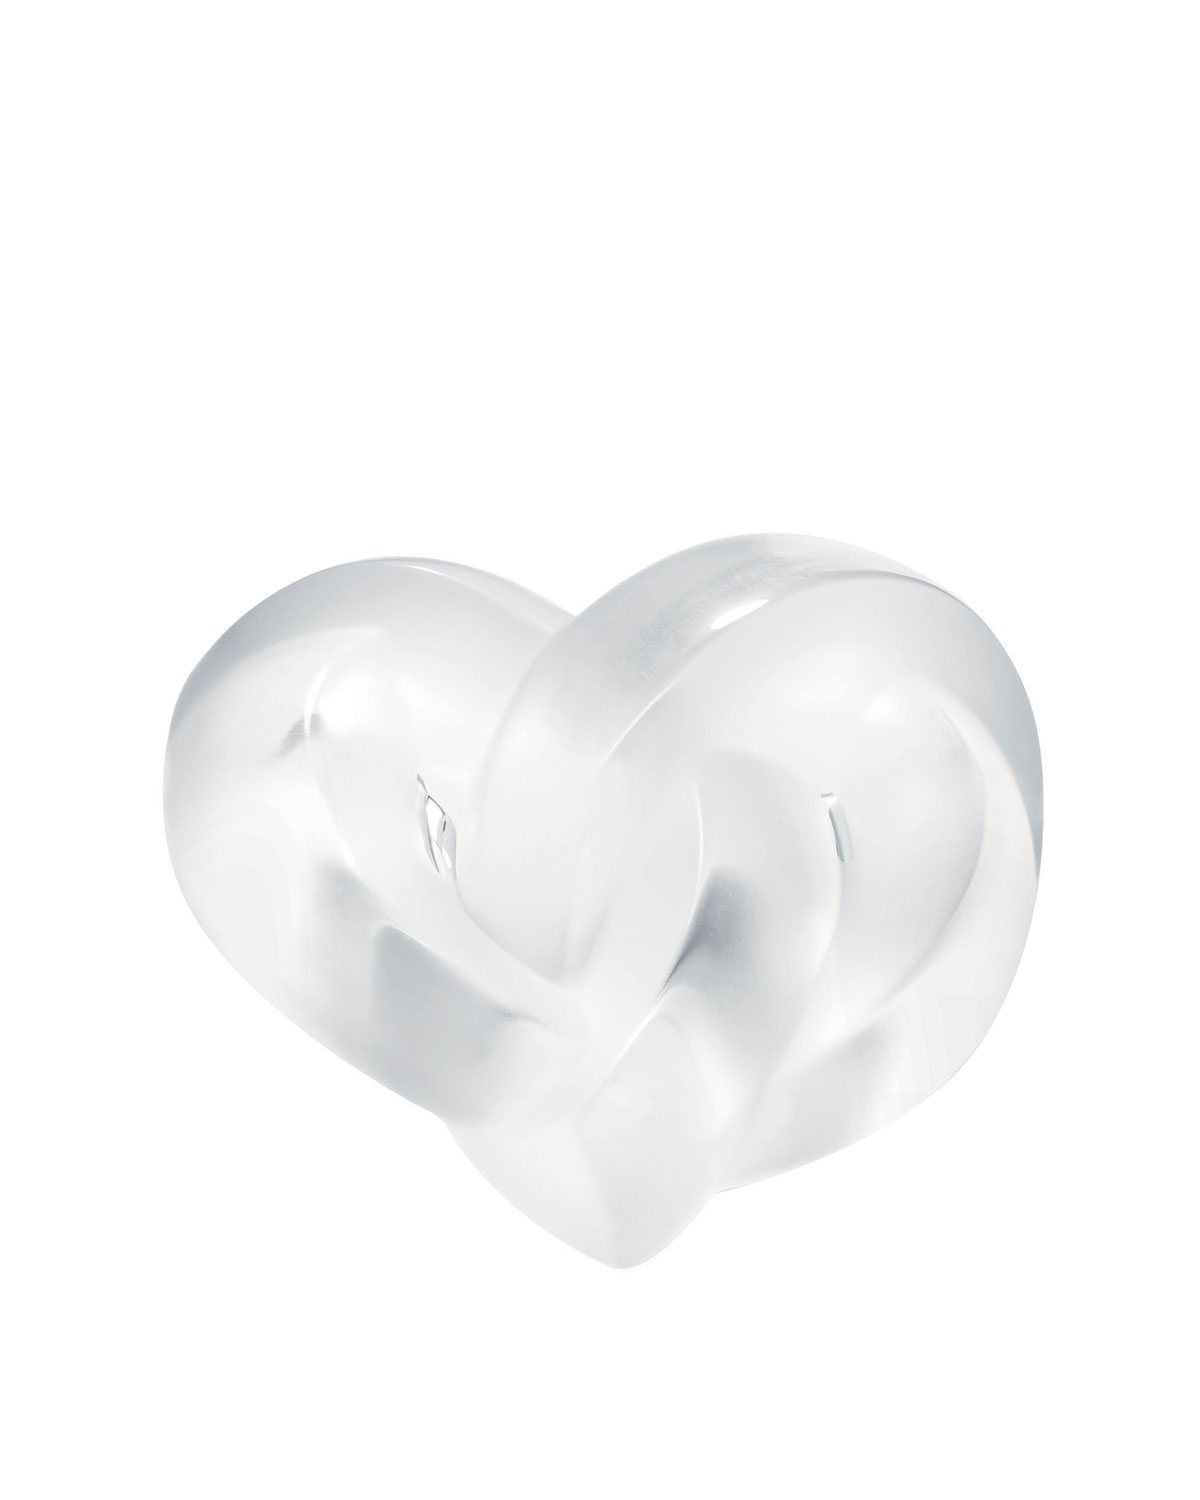 LALIQUE CLEAR HEART PAPERWEIGHT,PROD118970043